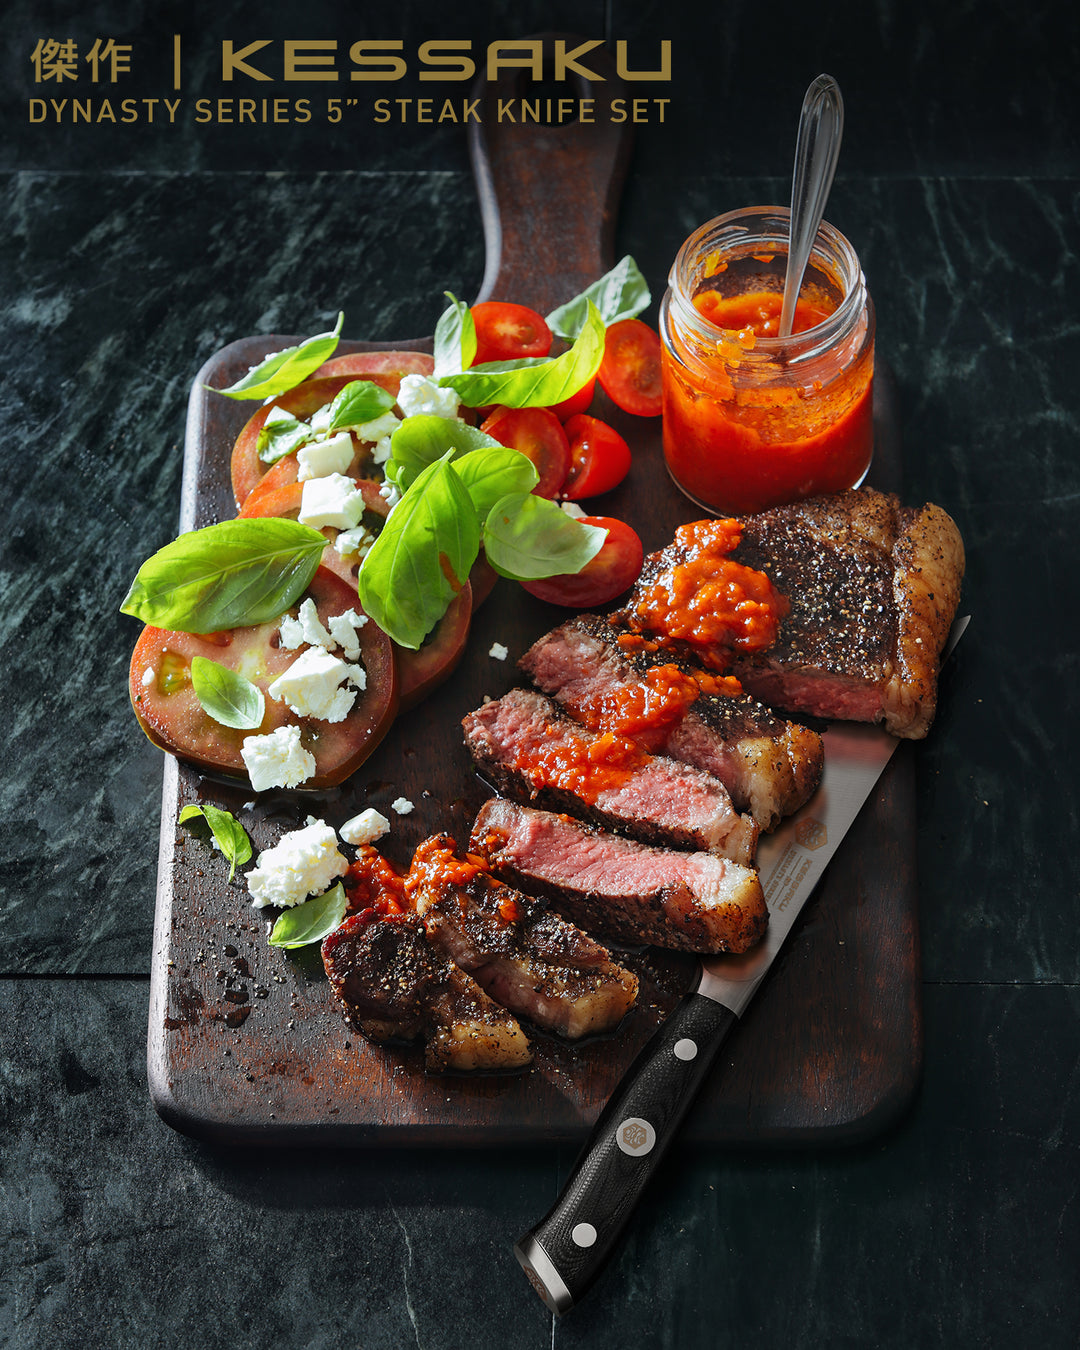 A Dynasty Steak Knife with slices of steak and tomato, basil, crumbled feta and chutney